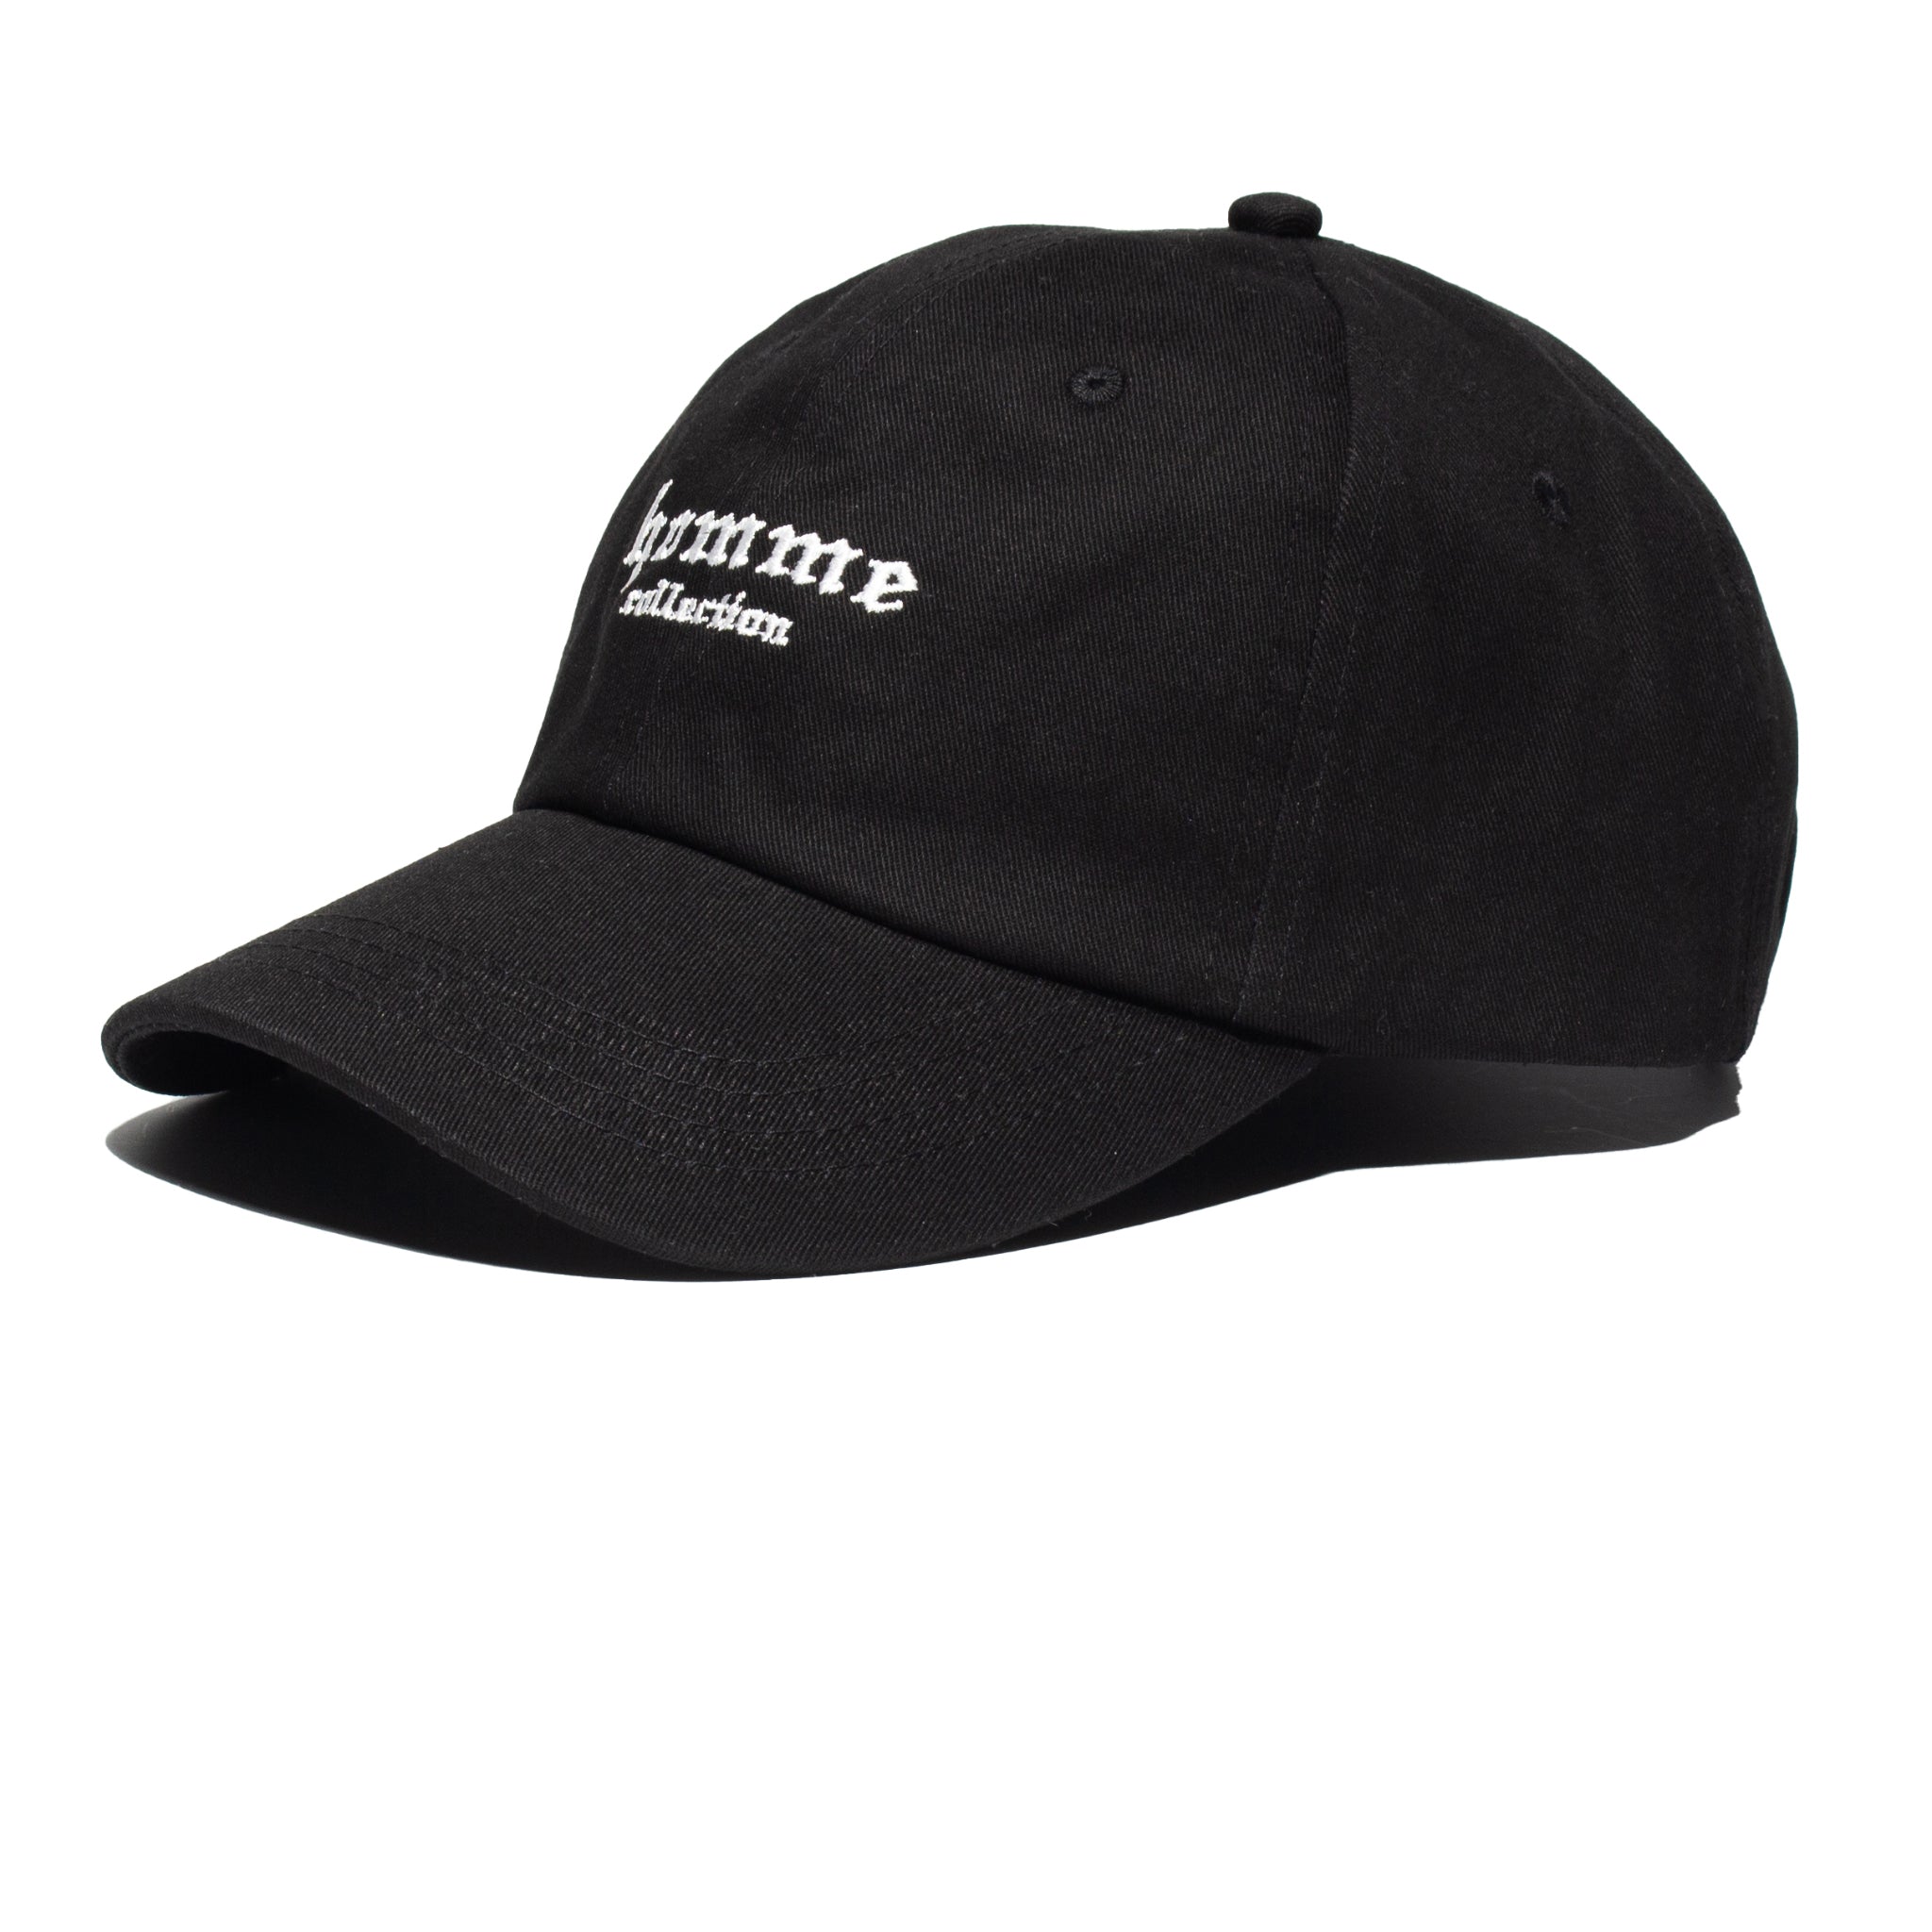 HOMME+ Embroidered Cap Black/White